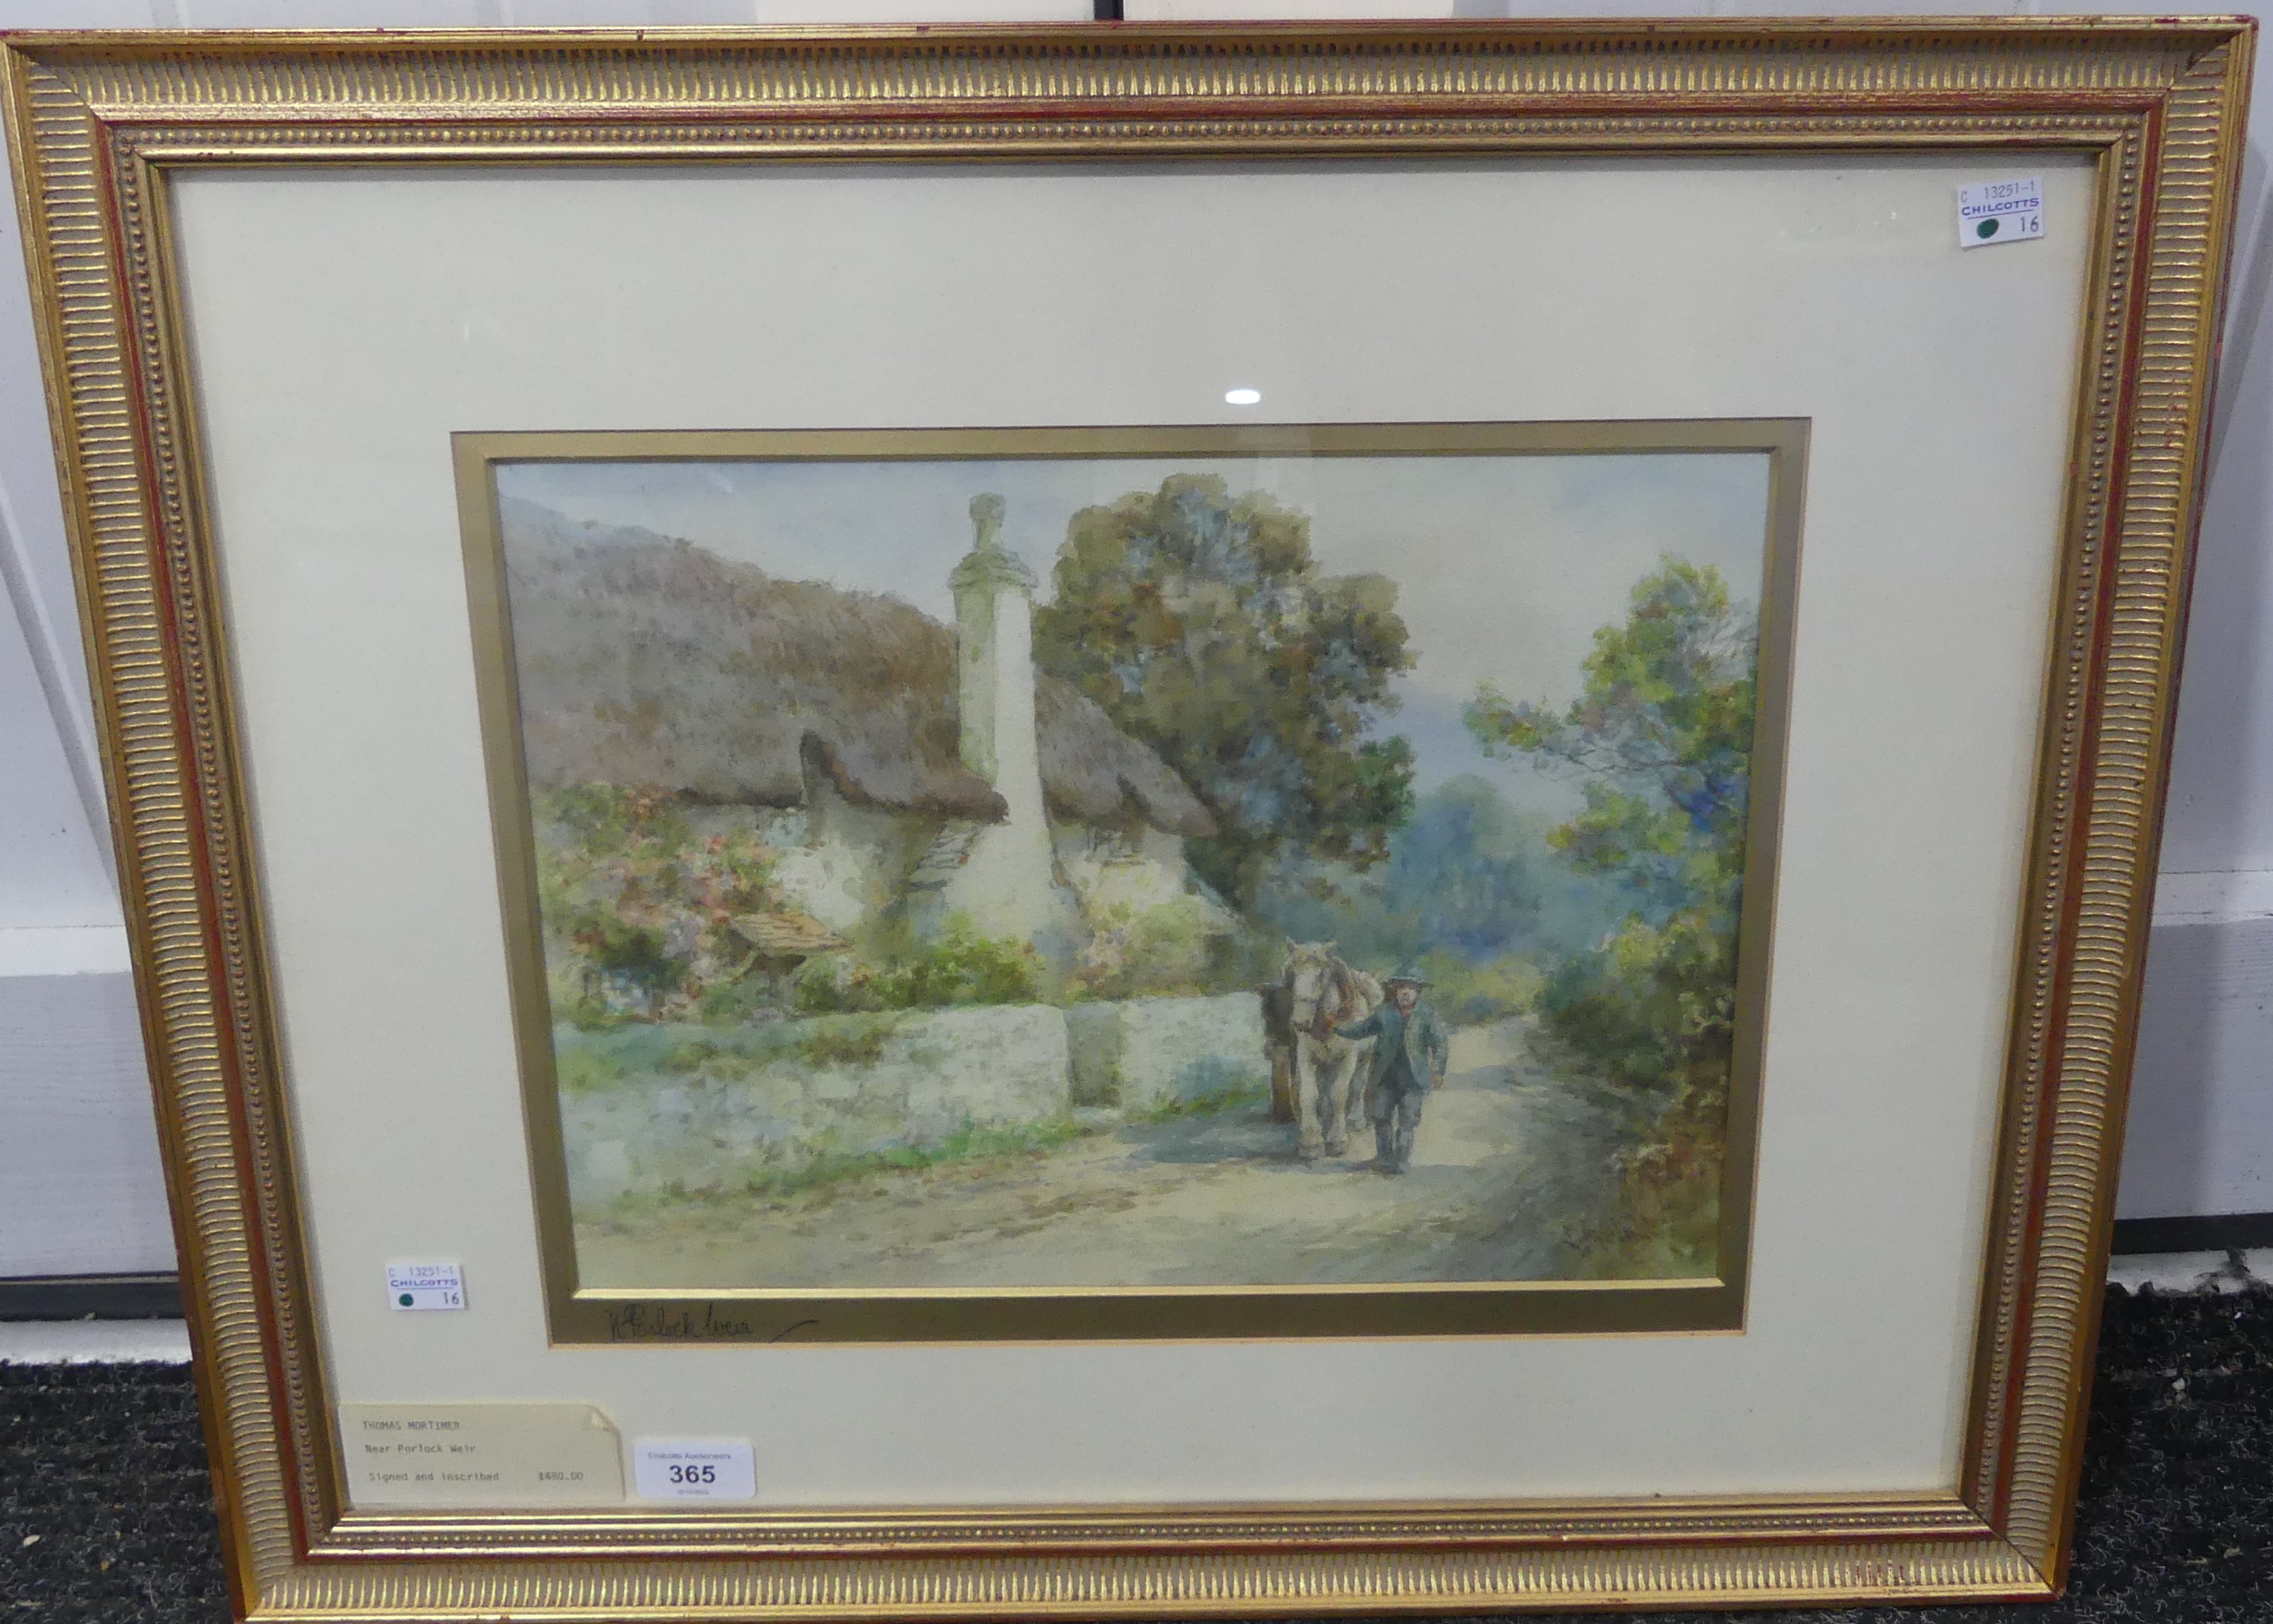 Thomas Mortimer (fl. 1880-1920). Nr. Porlock Weir, watercolour, signed lower right, titled on